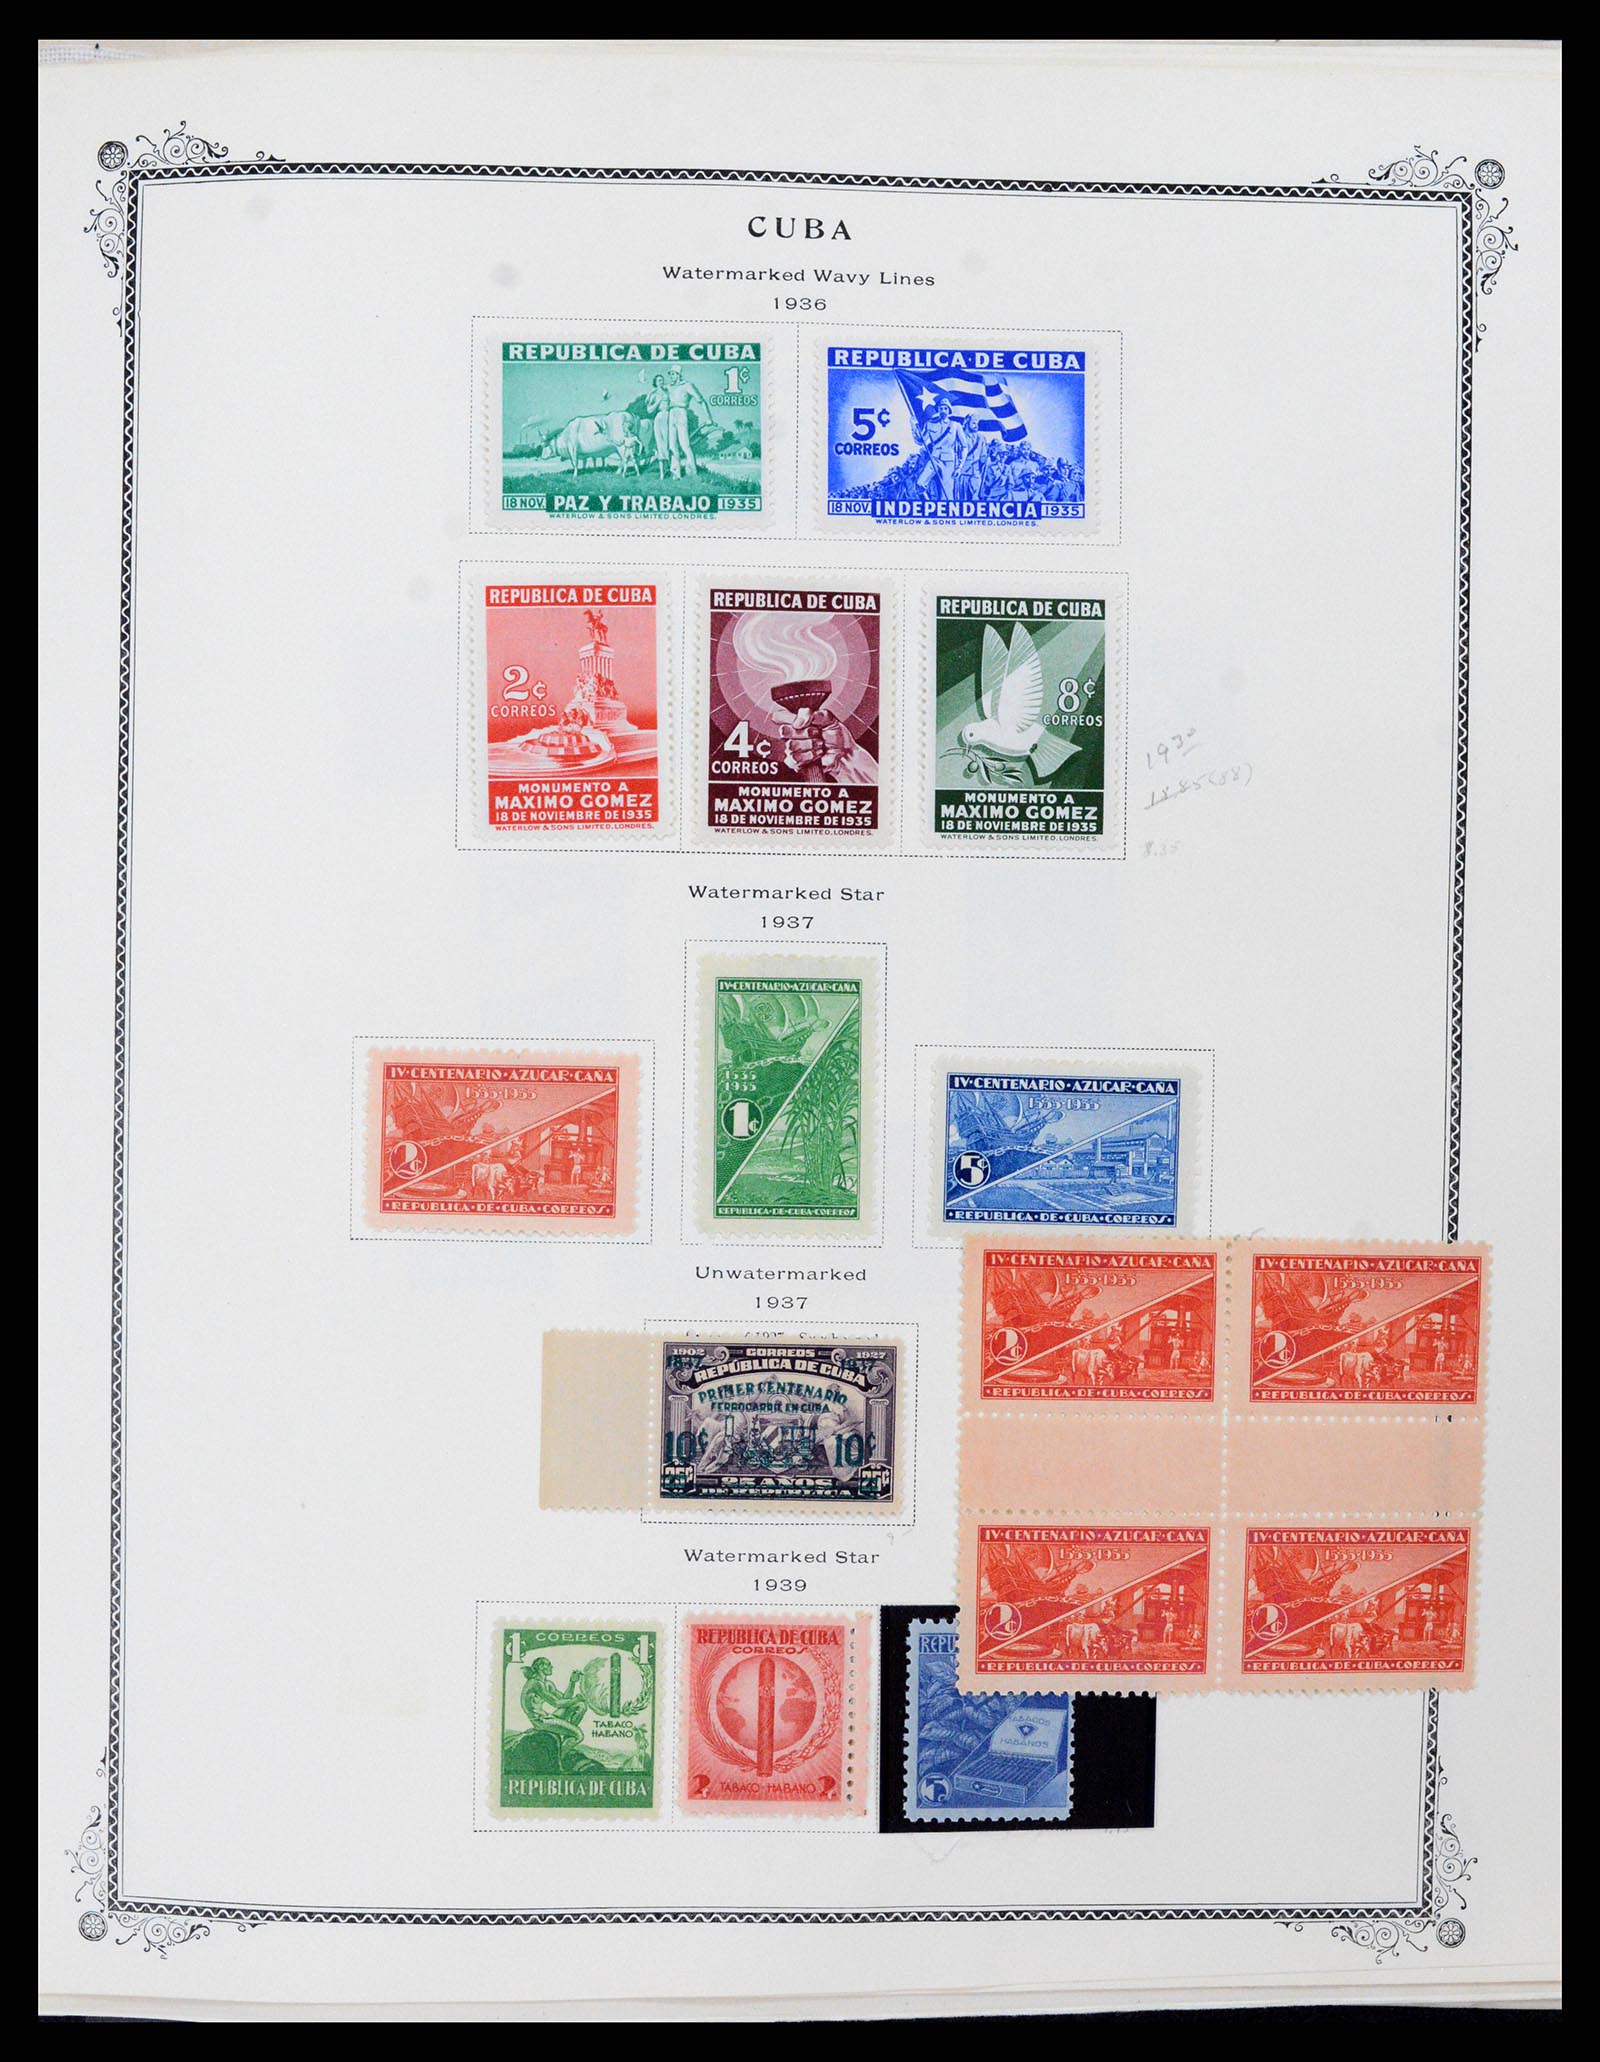 37228 020 - Stamp collection 37228 Cuba 1855-2009.